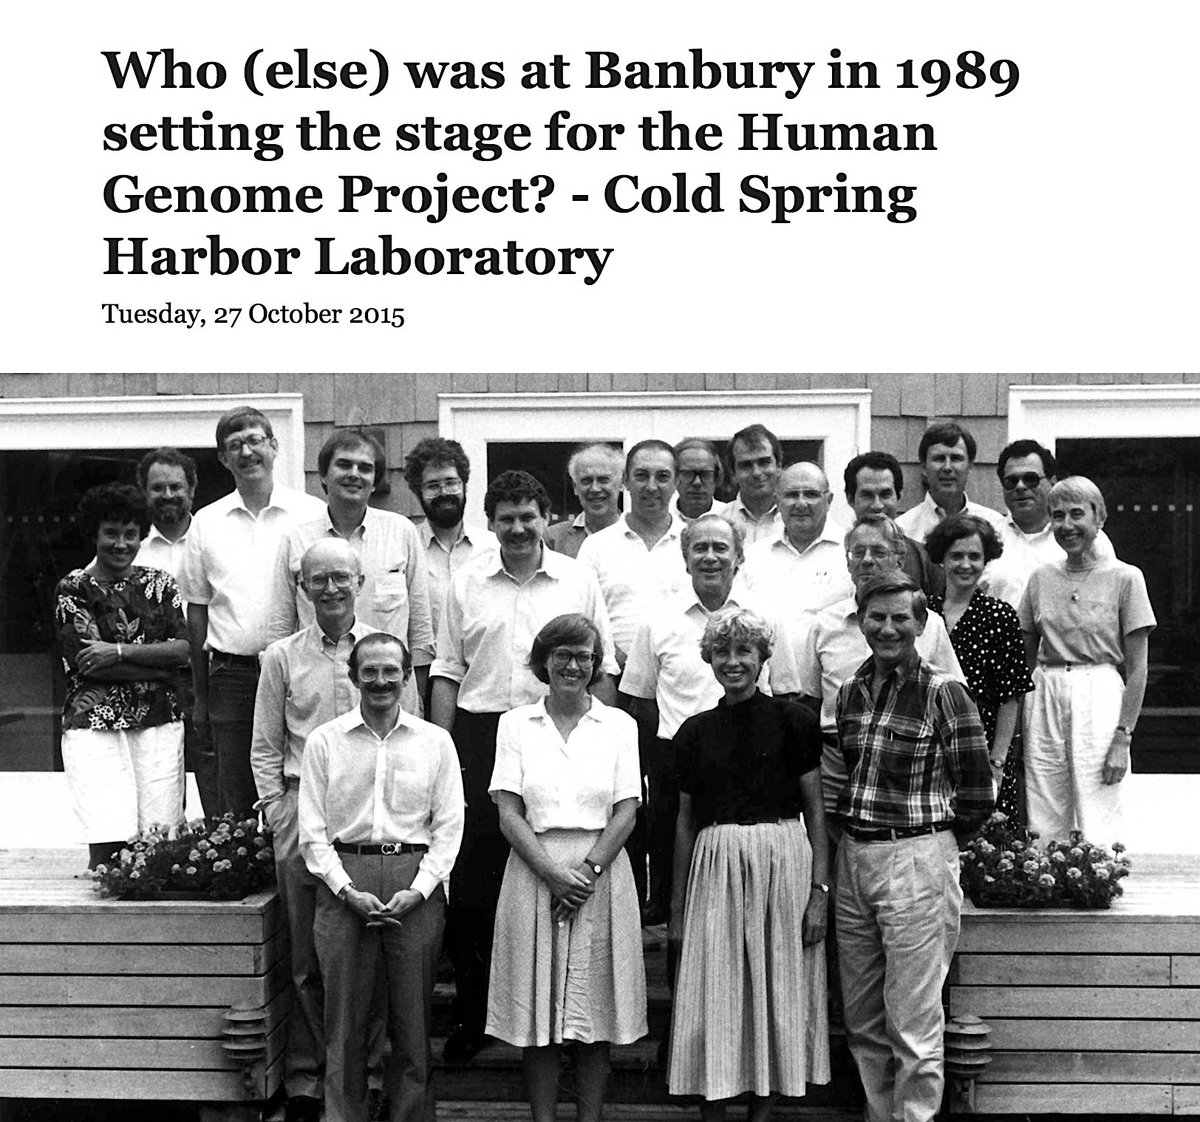 Who Are The Other Scientists In The Photo From The 1989 Banbury Meeting? And Why Don’t We Ever Hear About The Women? https://www.cshl.edu/else-banbury-1989-setting-stage-human-genome-project #QAnon  #Eugenics  #Genome  @potus